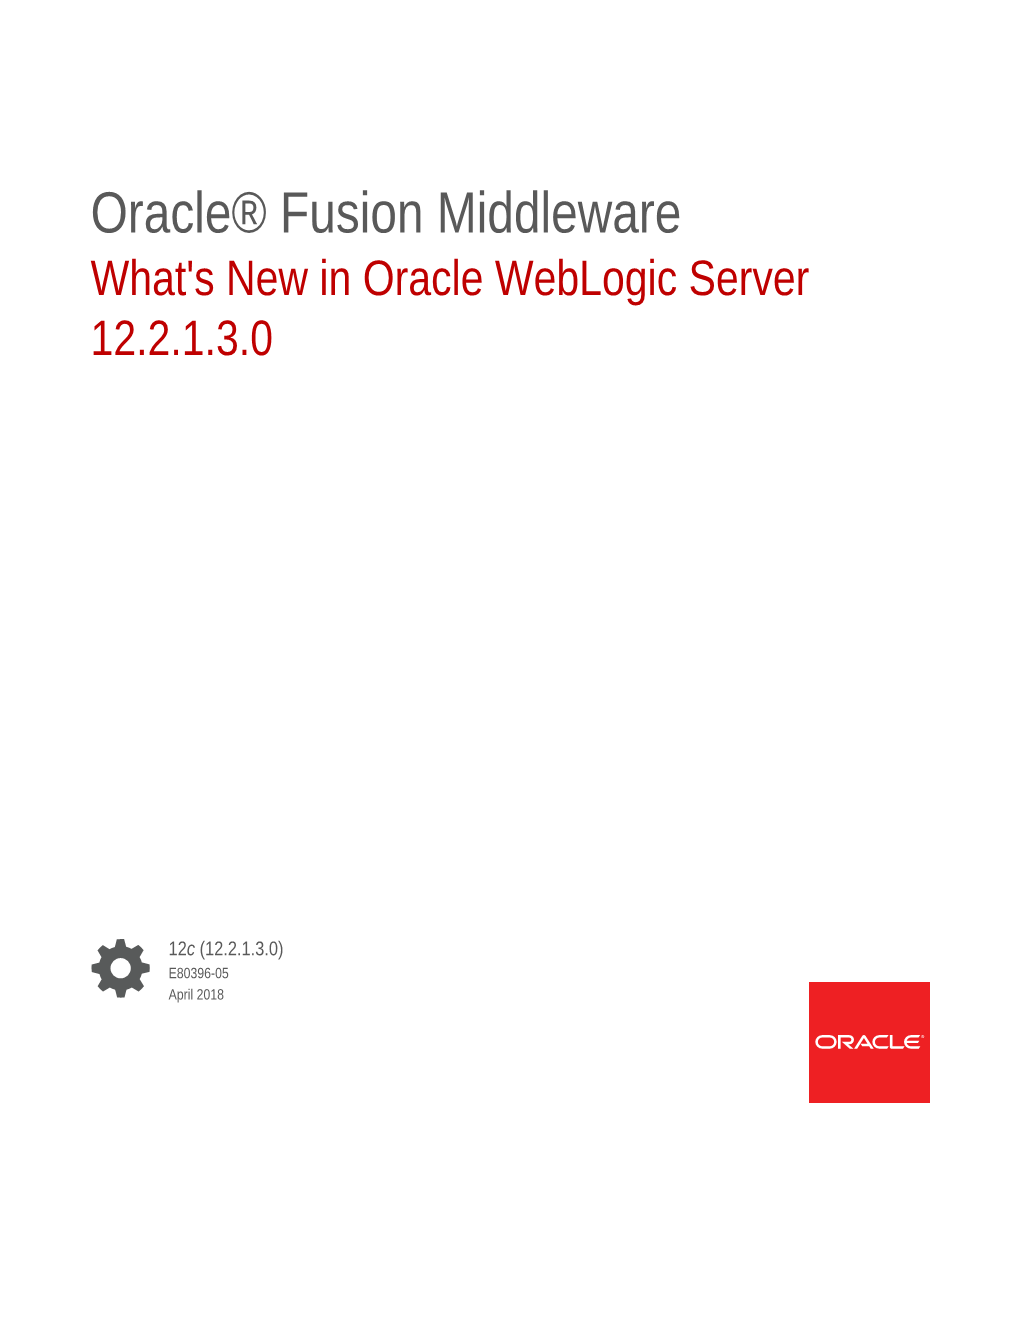 What's New in Oracle Weblogic Server 12.2.1.3.0